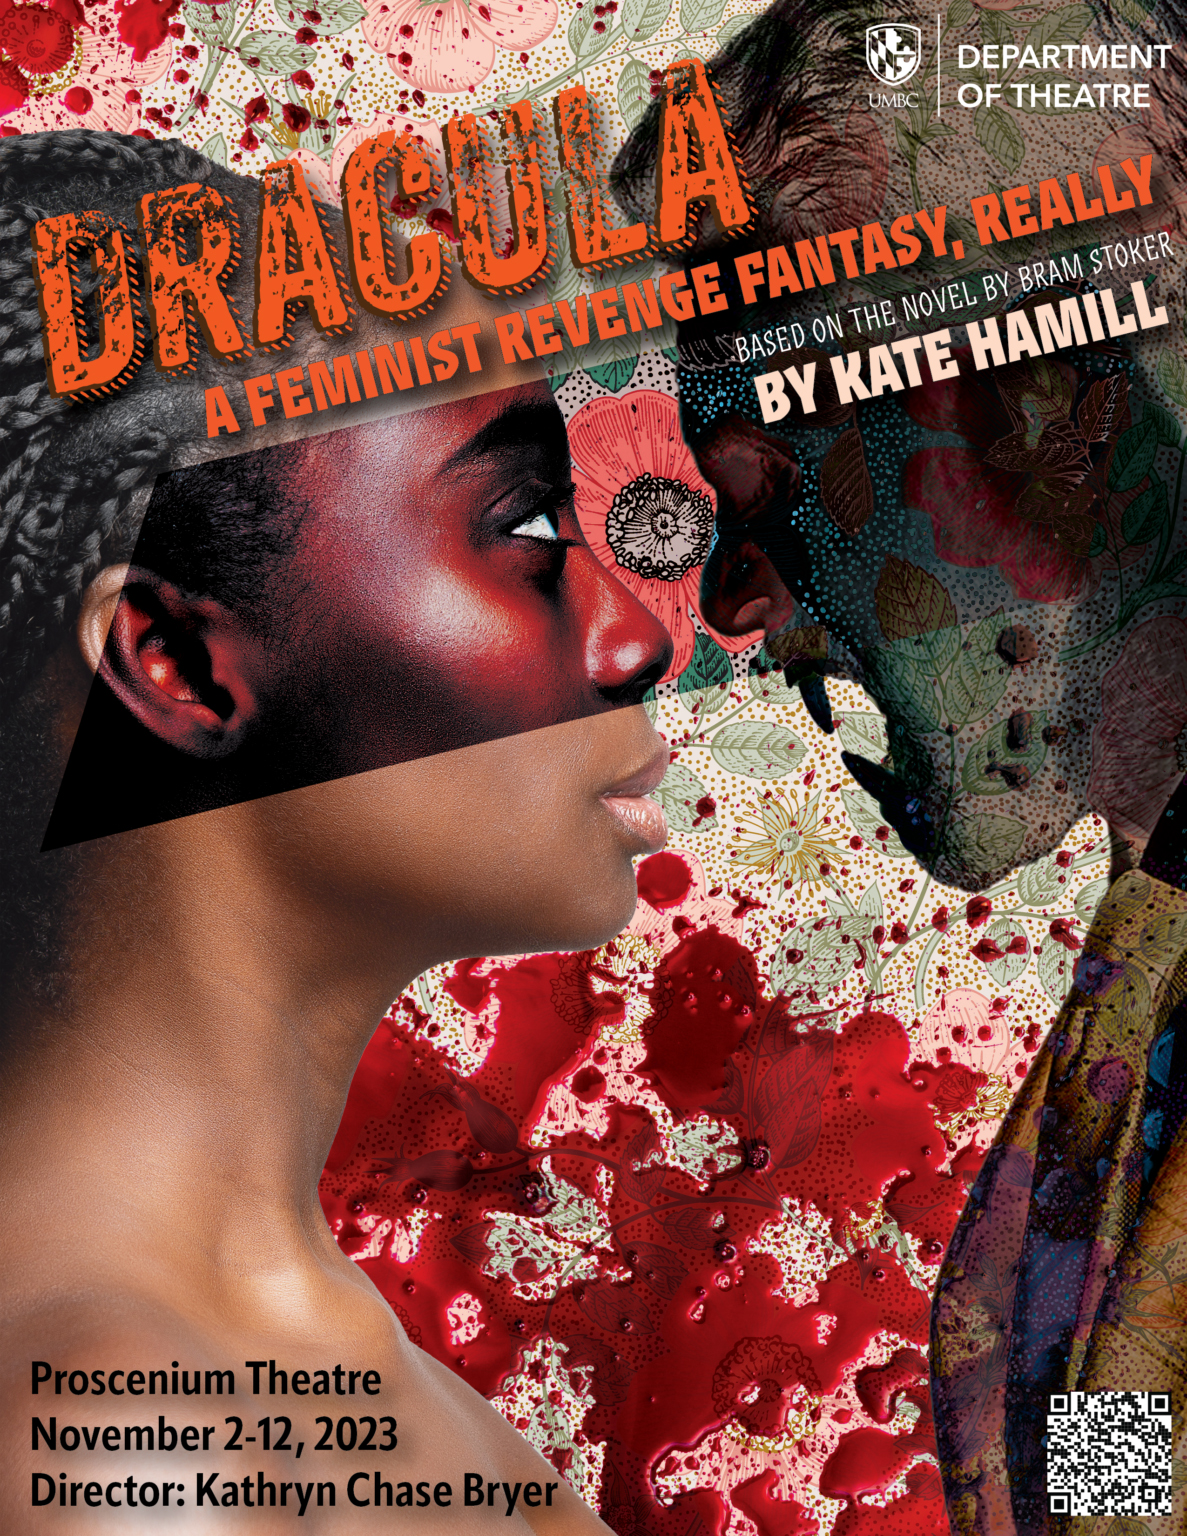 A playfully bloody promotional poster for a show says Dracula: A Feminist Revenge Fantasy, Really